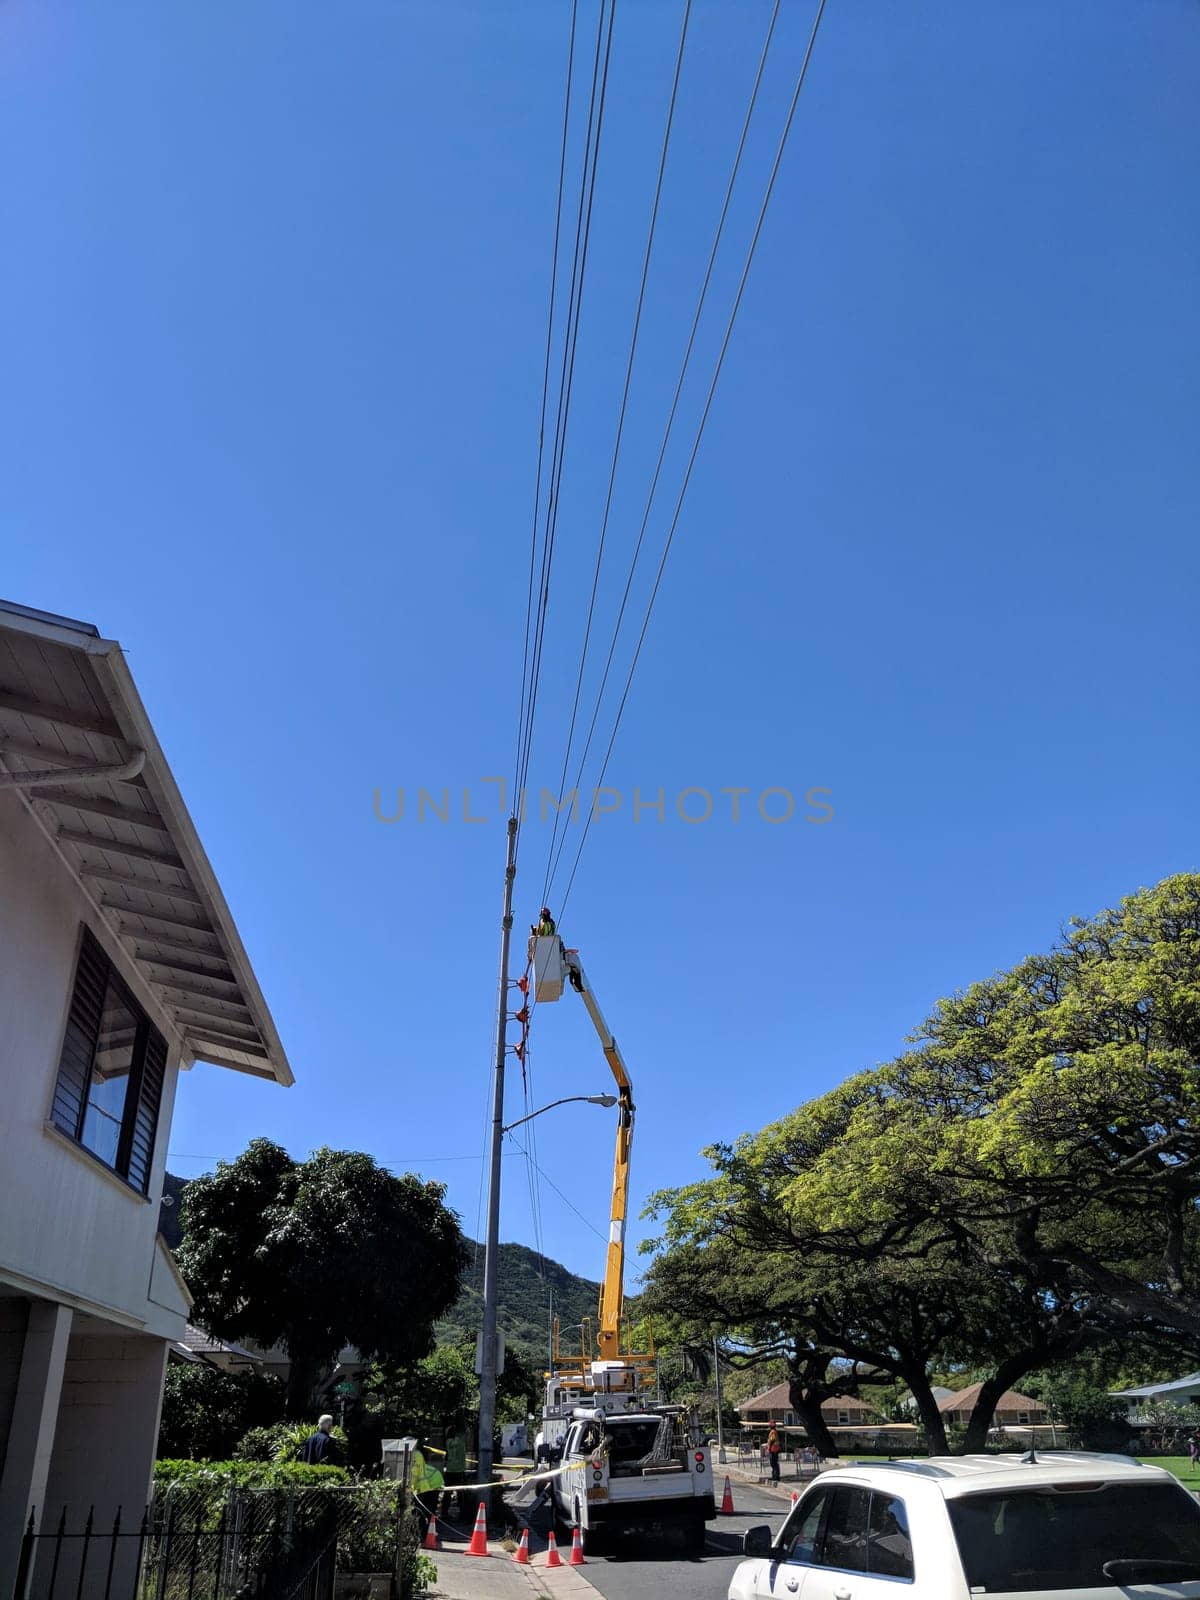 Waikiki - March 28, 2018: A skilled HECO technician ensures uninterrupted power supply by repairing a power line against the backdrop of clear blue skies and lush greenery in Waikiki.